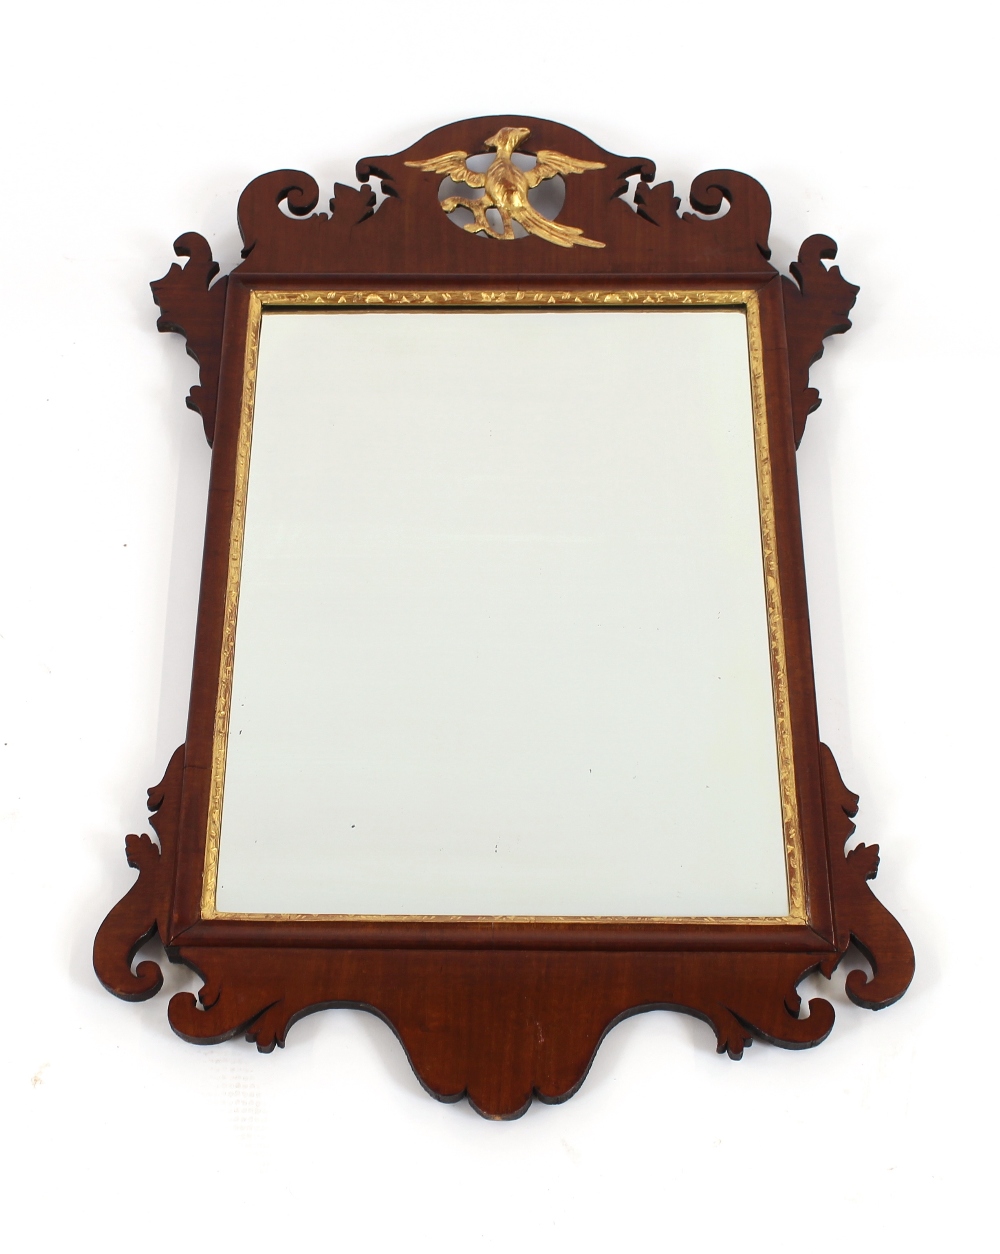 A mahogany Chippendale style fret carved wall mirror, having gilt Ho Ho bird motif, 75cm x 52cm in